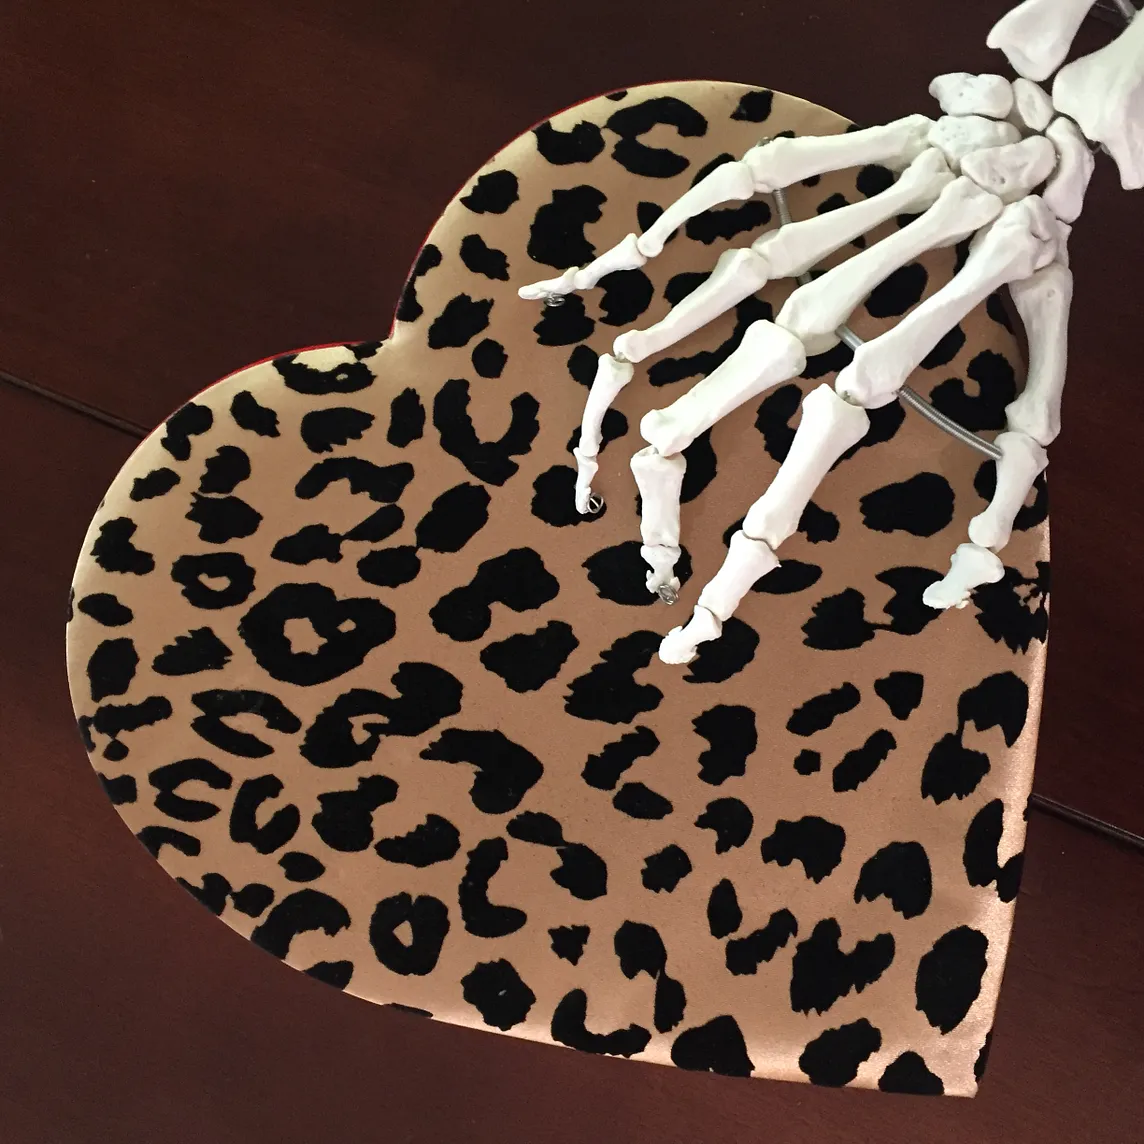 A skeletal hand clutches a heart-shaped box covered in leopard skin-patterned velvet.